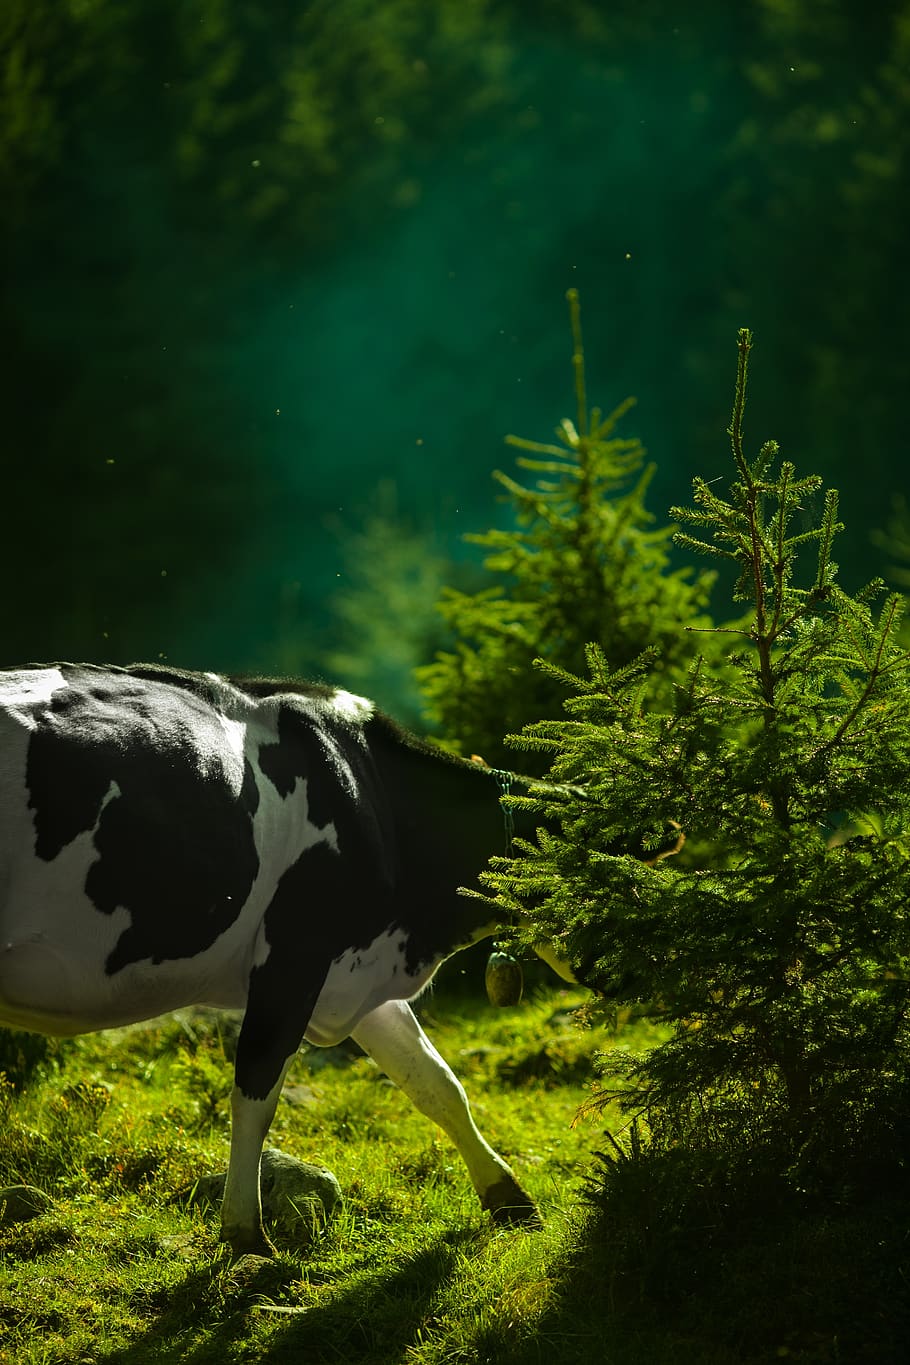 cow, animal, herbivore, green, nature, leaves, grass, farm, animal themes, plant